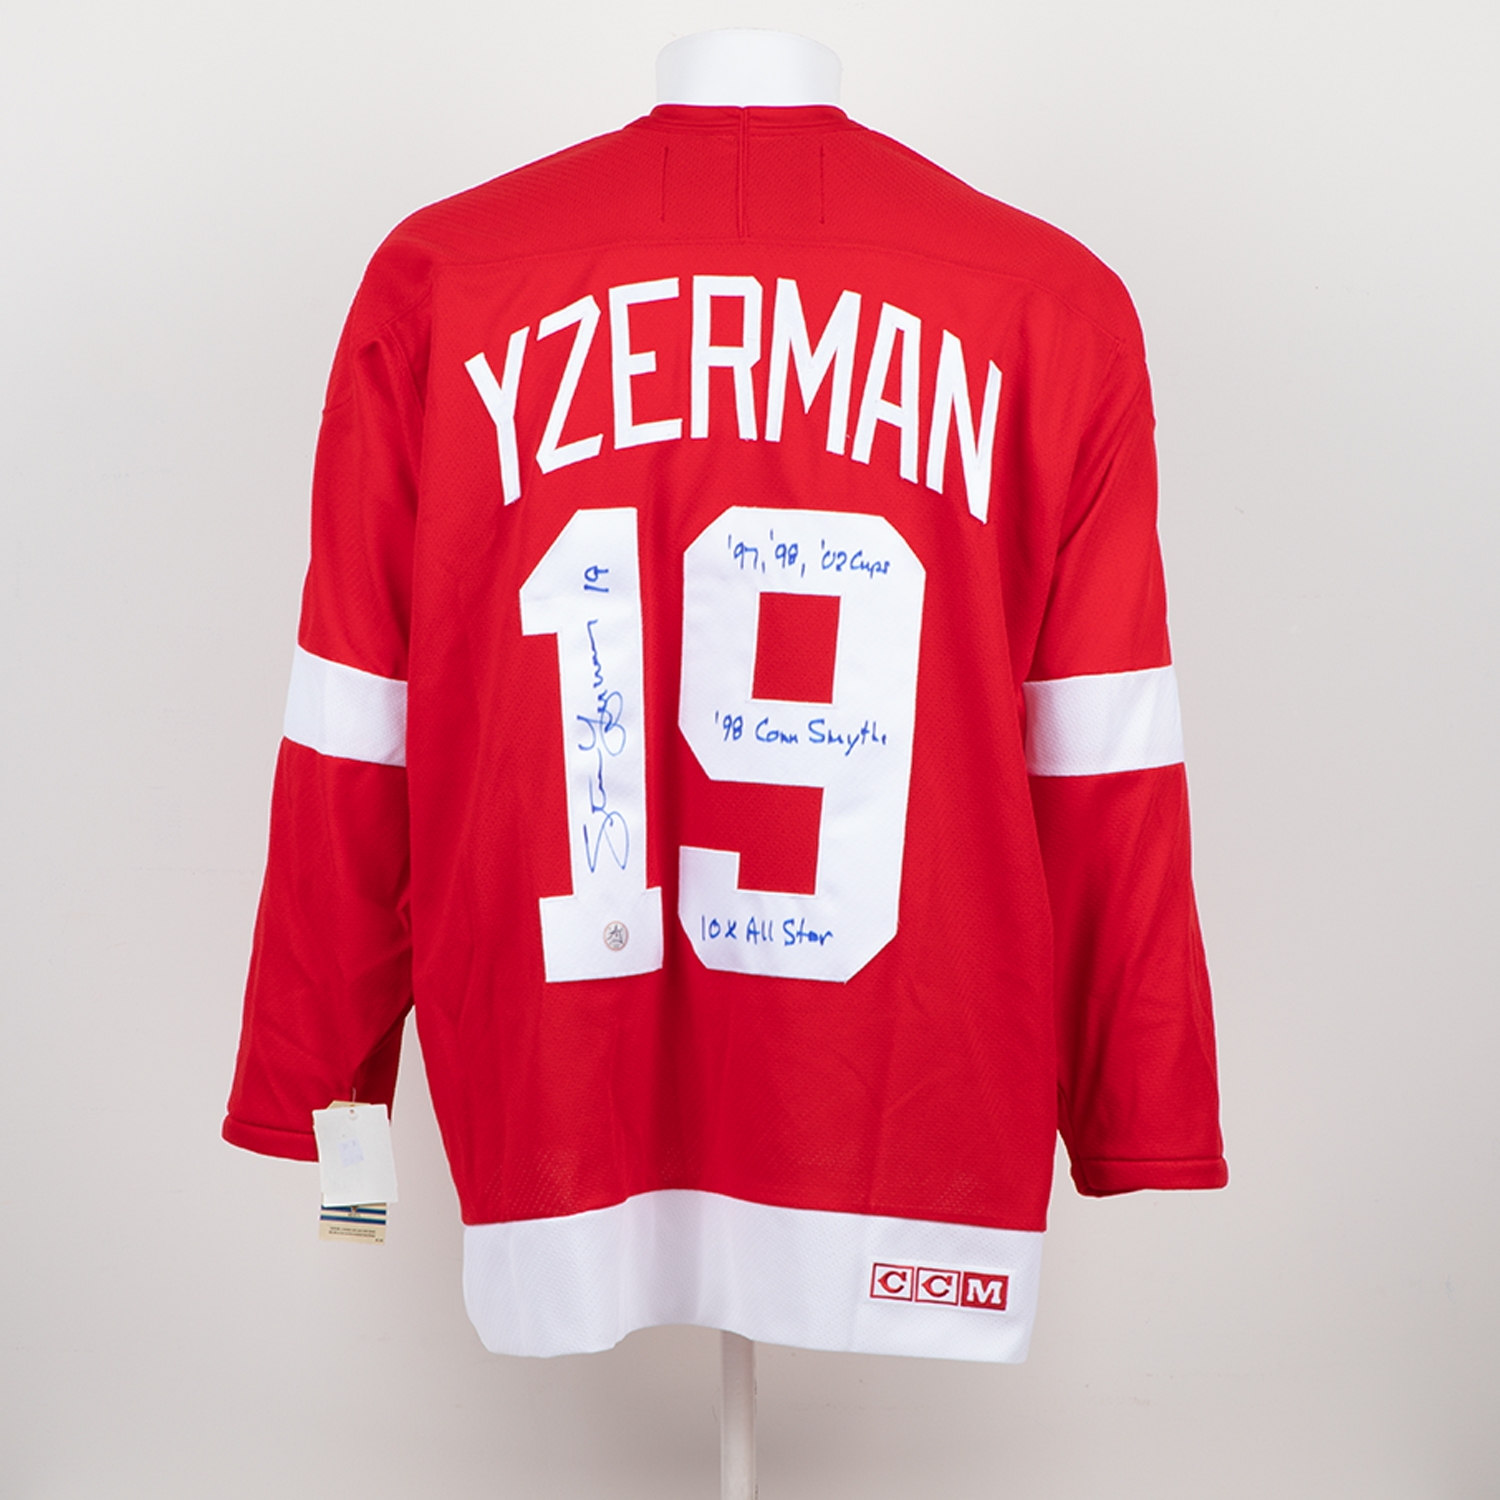 Steve Yzerman Signed Detroit Red Wings Vintage CCM Jersey with Career Stats